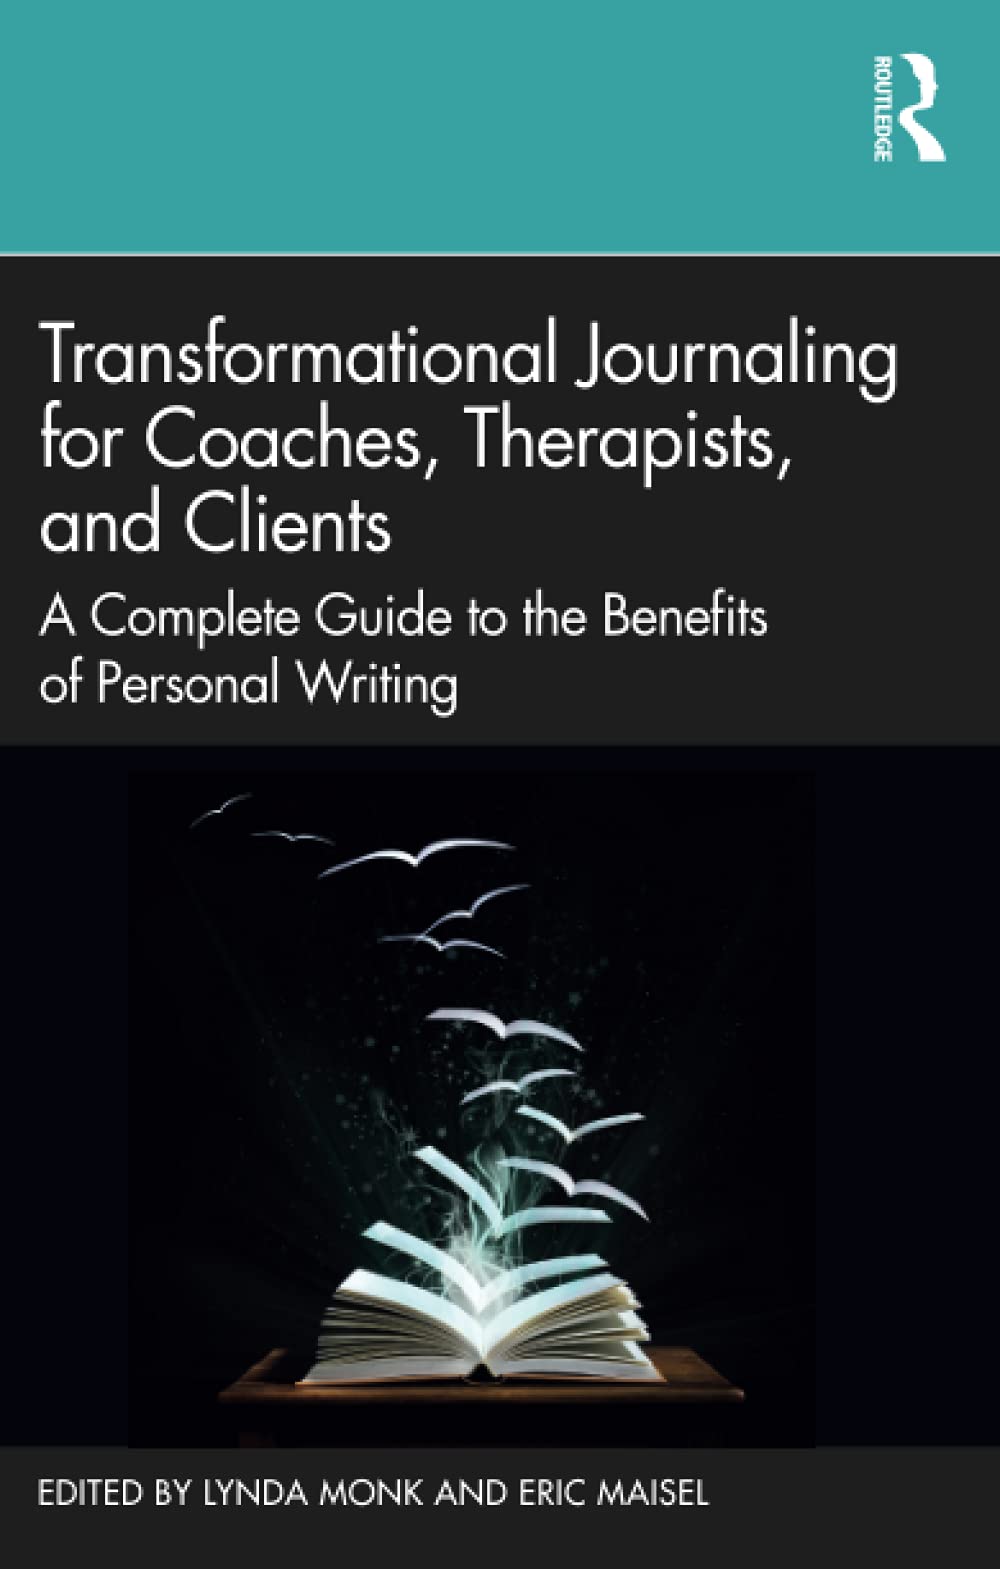 Transformational Journaling for Coaches, Therapists and Clients